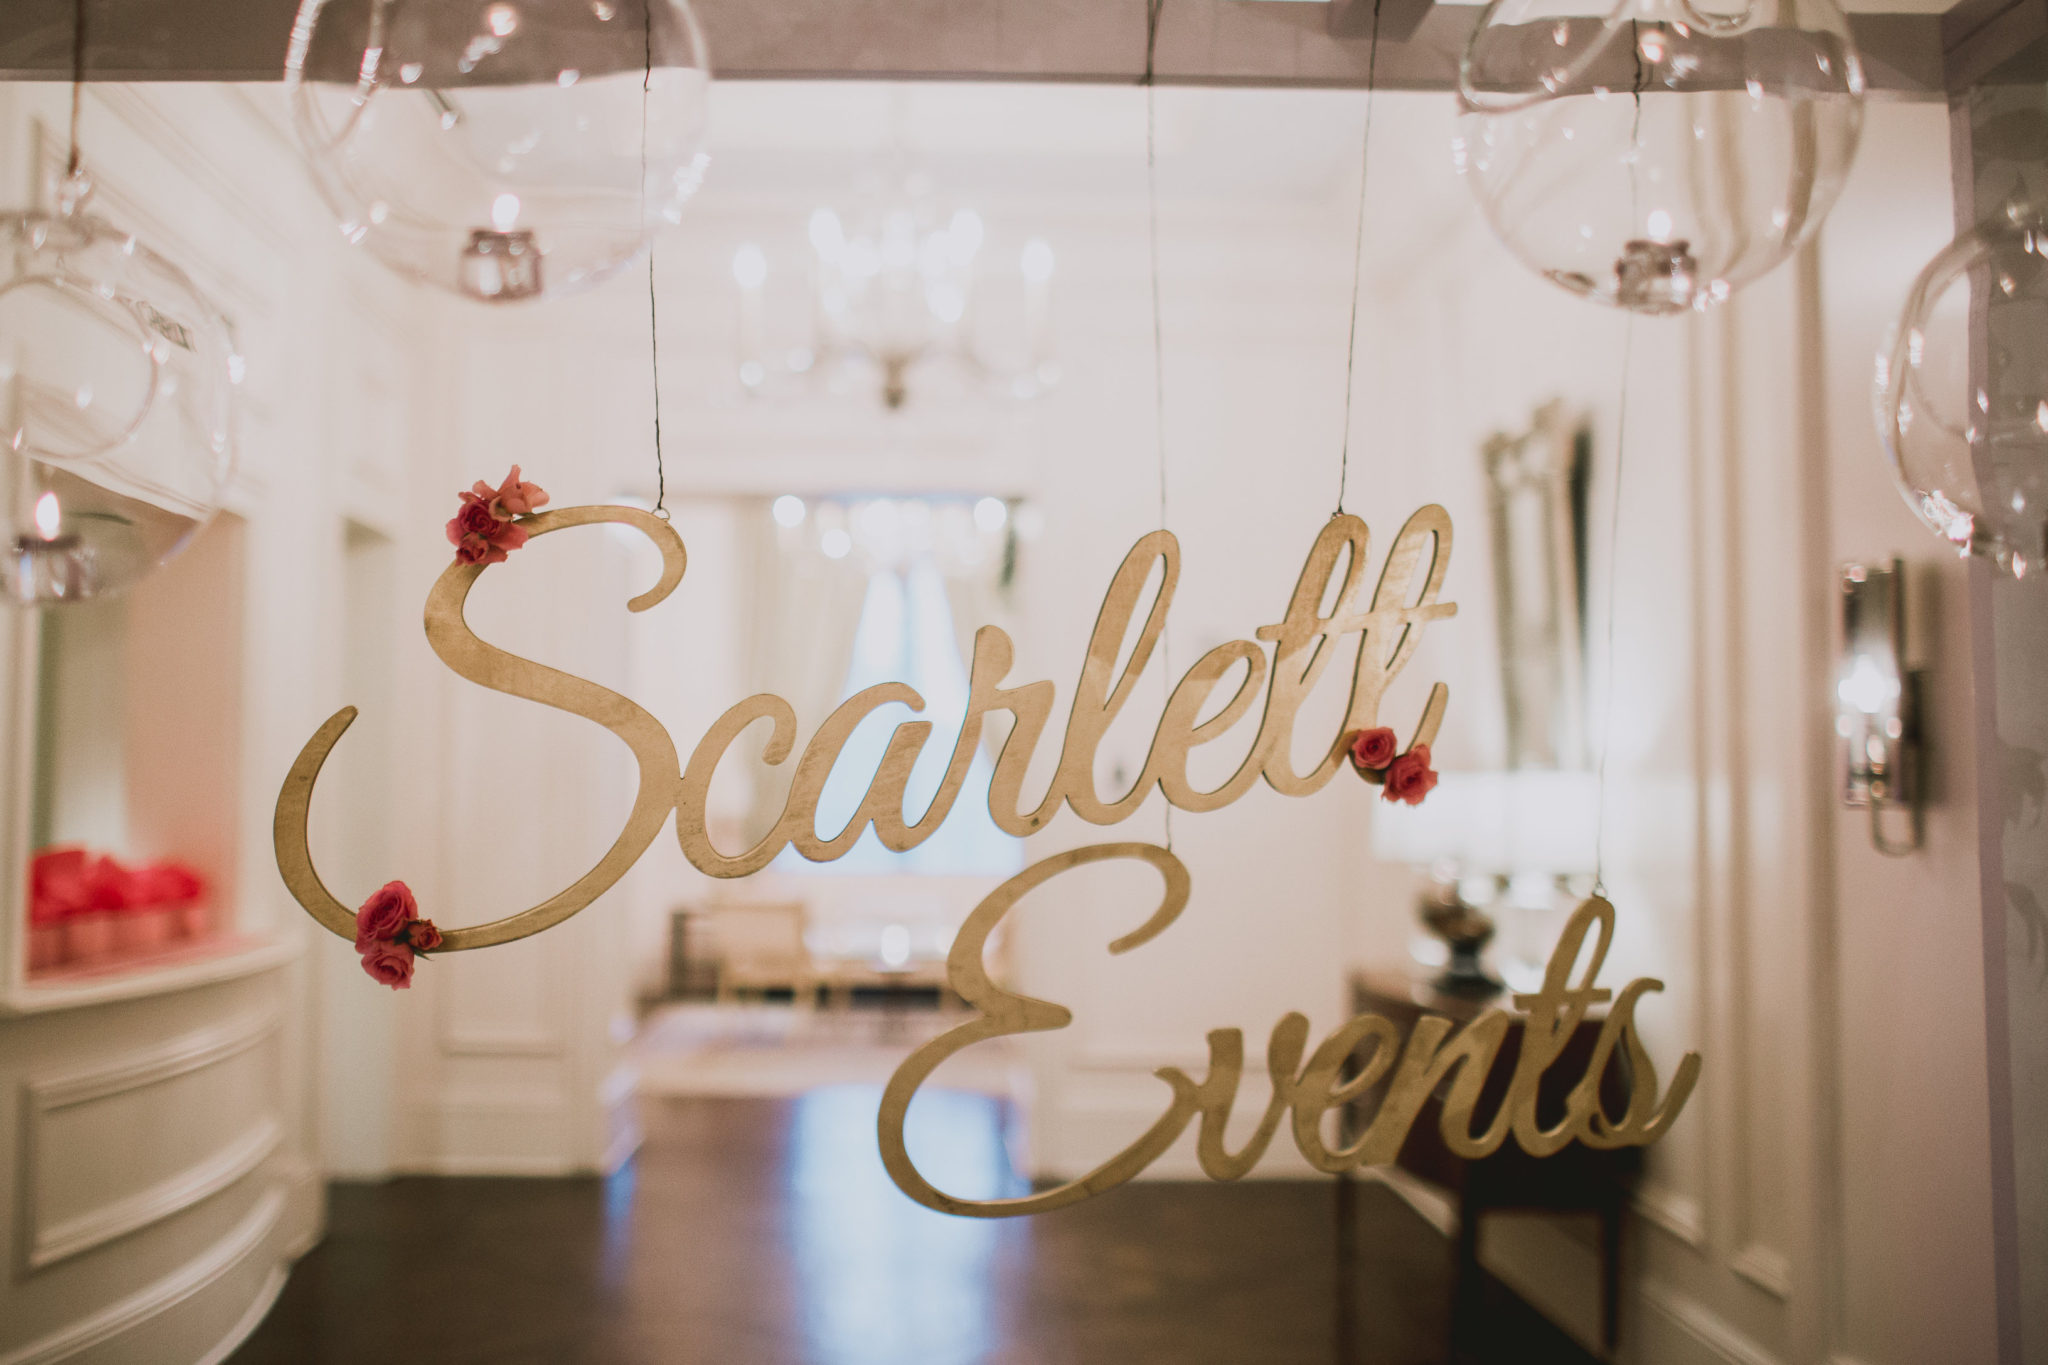 View More: http://kelleyraye.pass.us/scarlett-events-launch